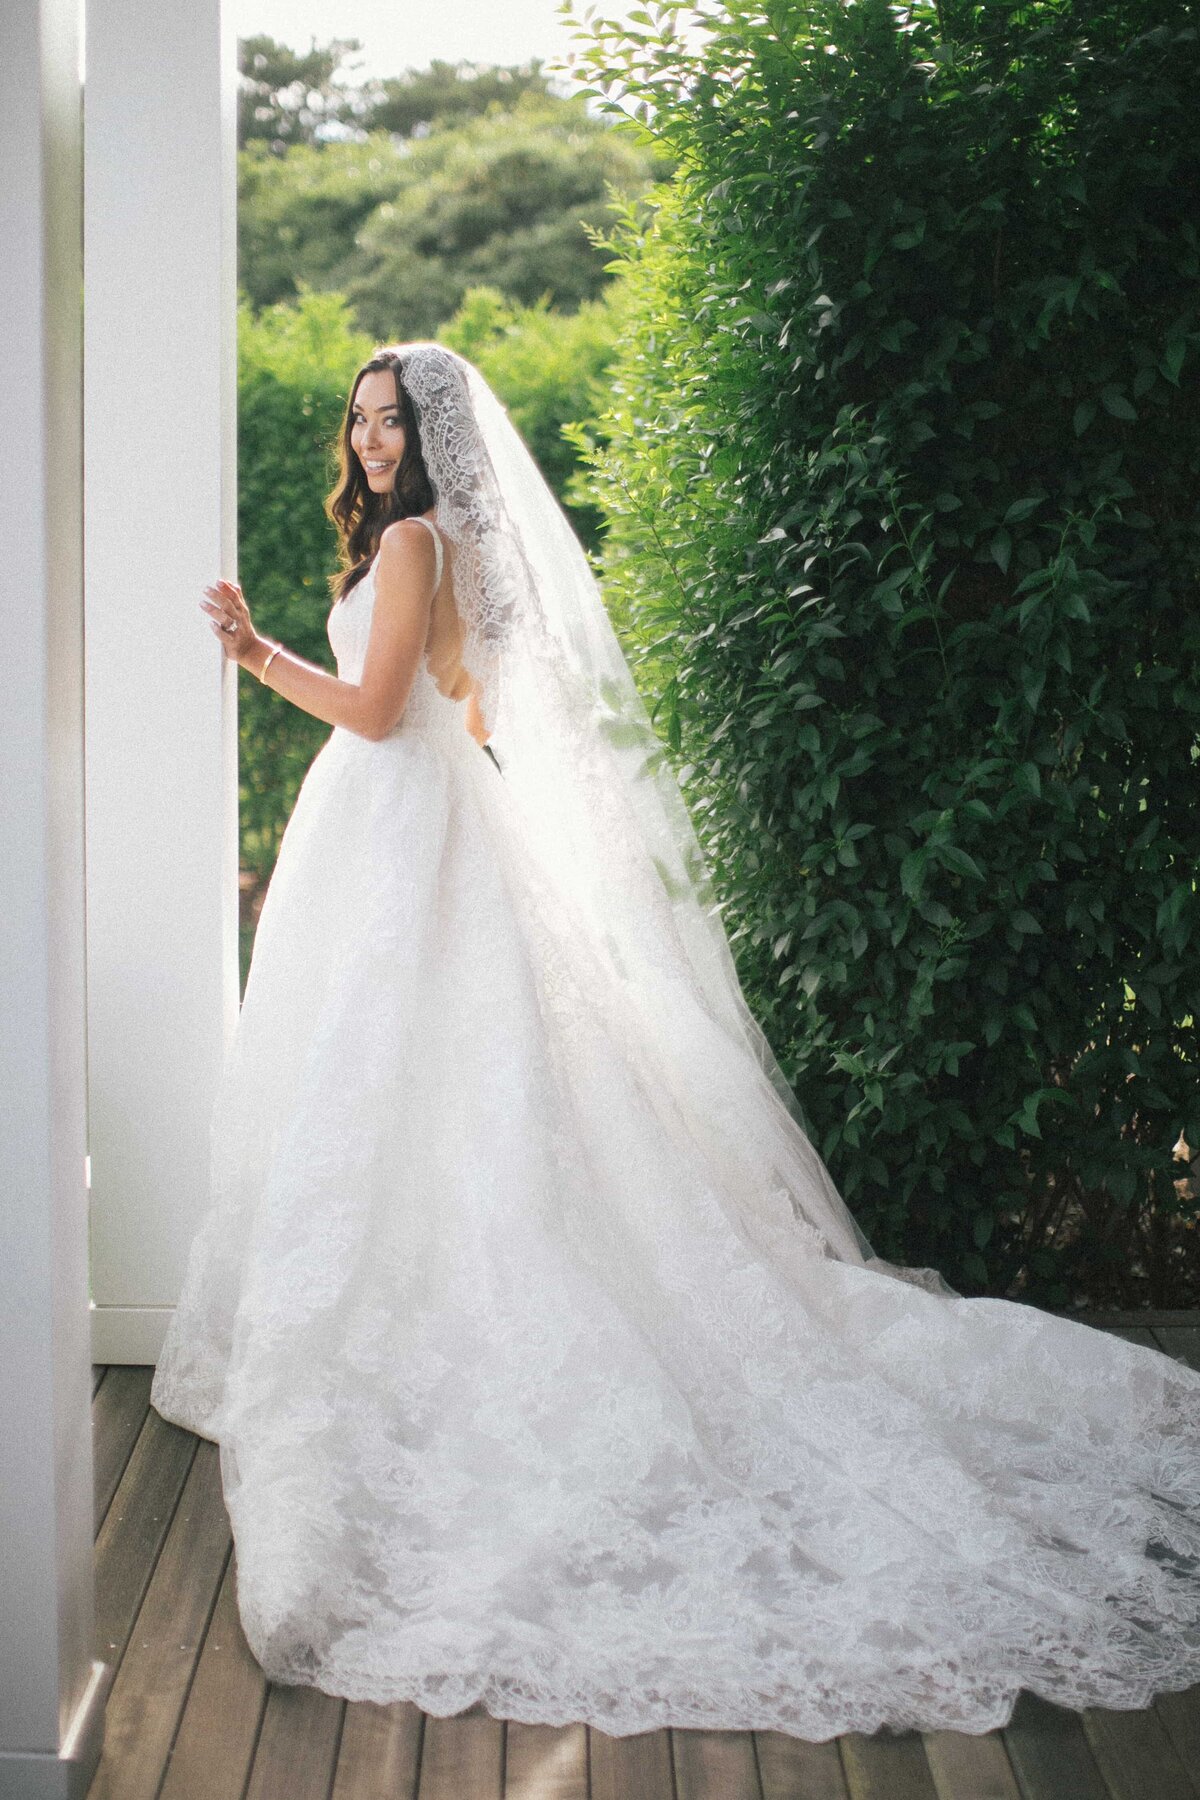 Bride Smiling with Lace Wedding Gown and Veil